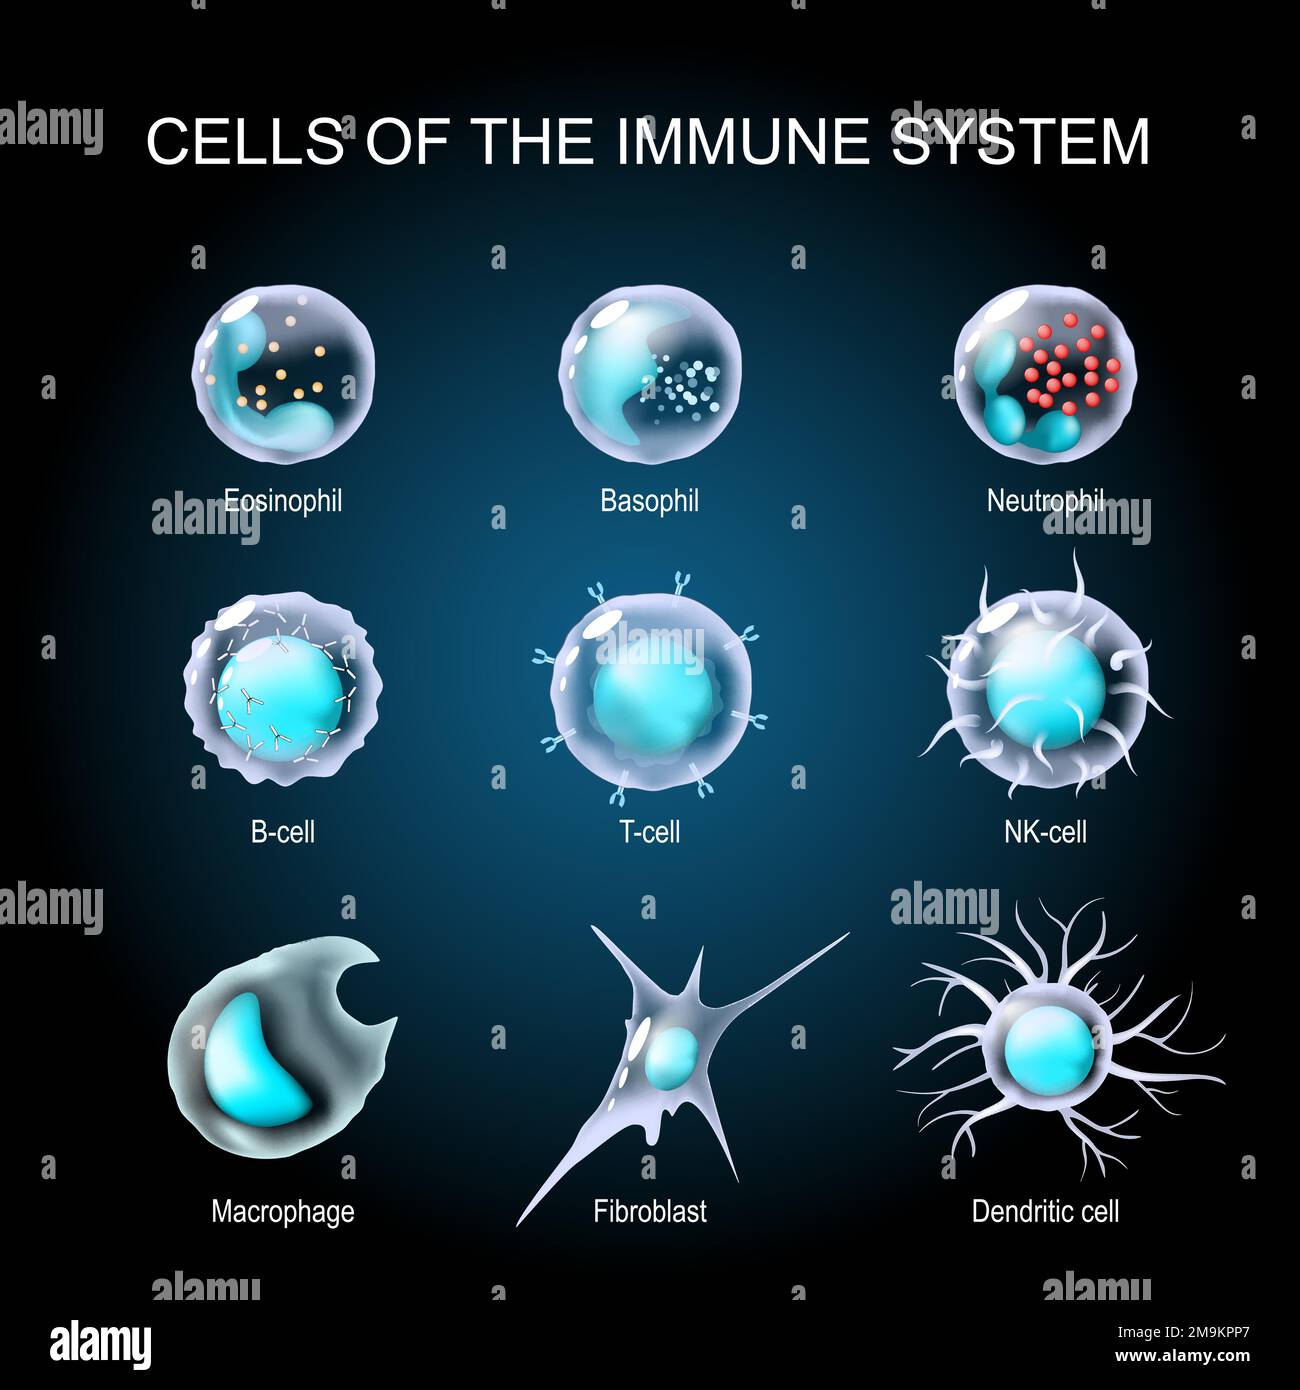 Cells of the immune system. White blood cells or leukocytes Eosinophil, Neutrophil, Basophil, Macrophage, Fibroblast, and Dendritic cell. Set Stock Vector